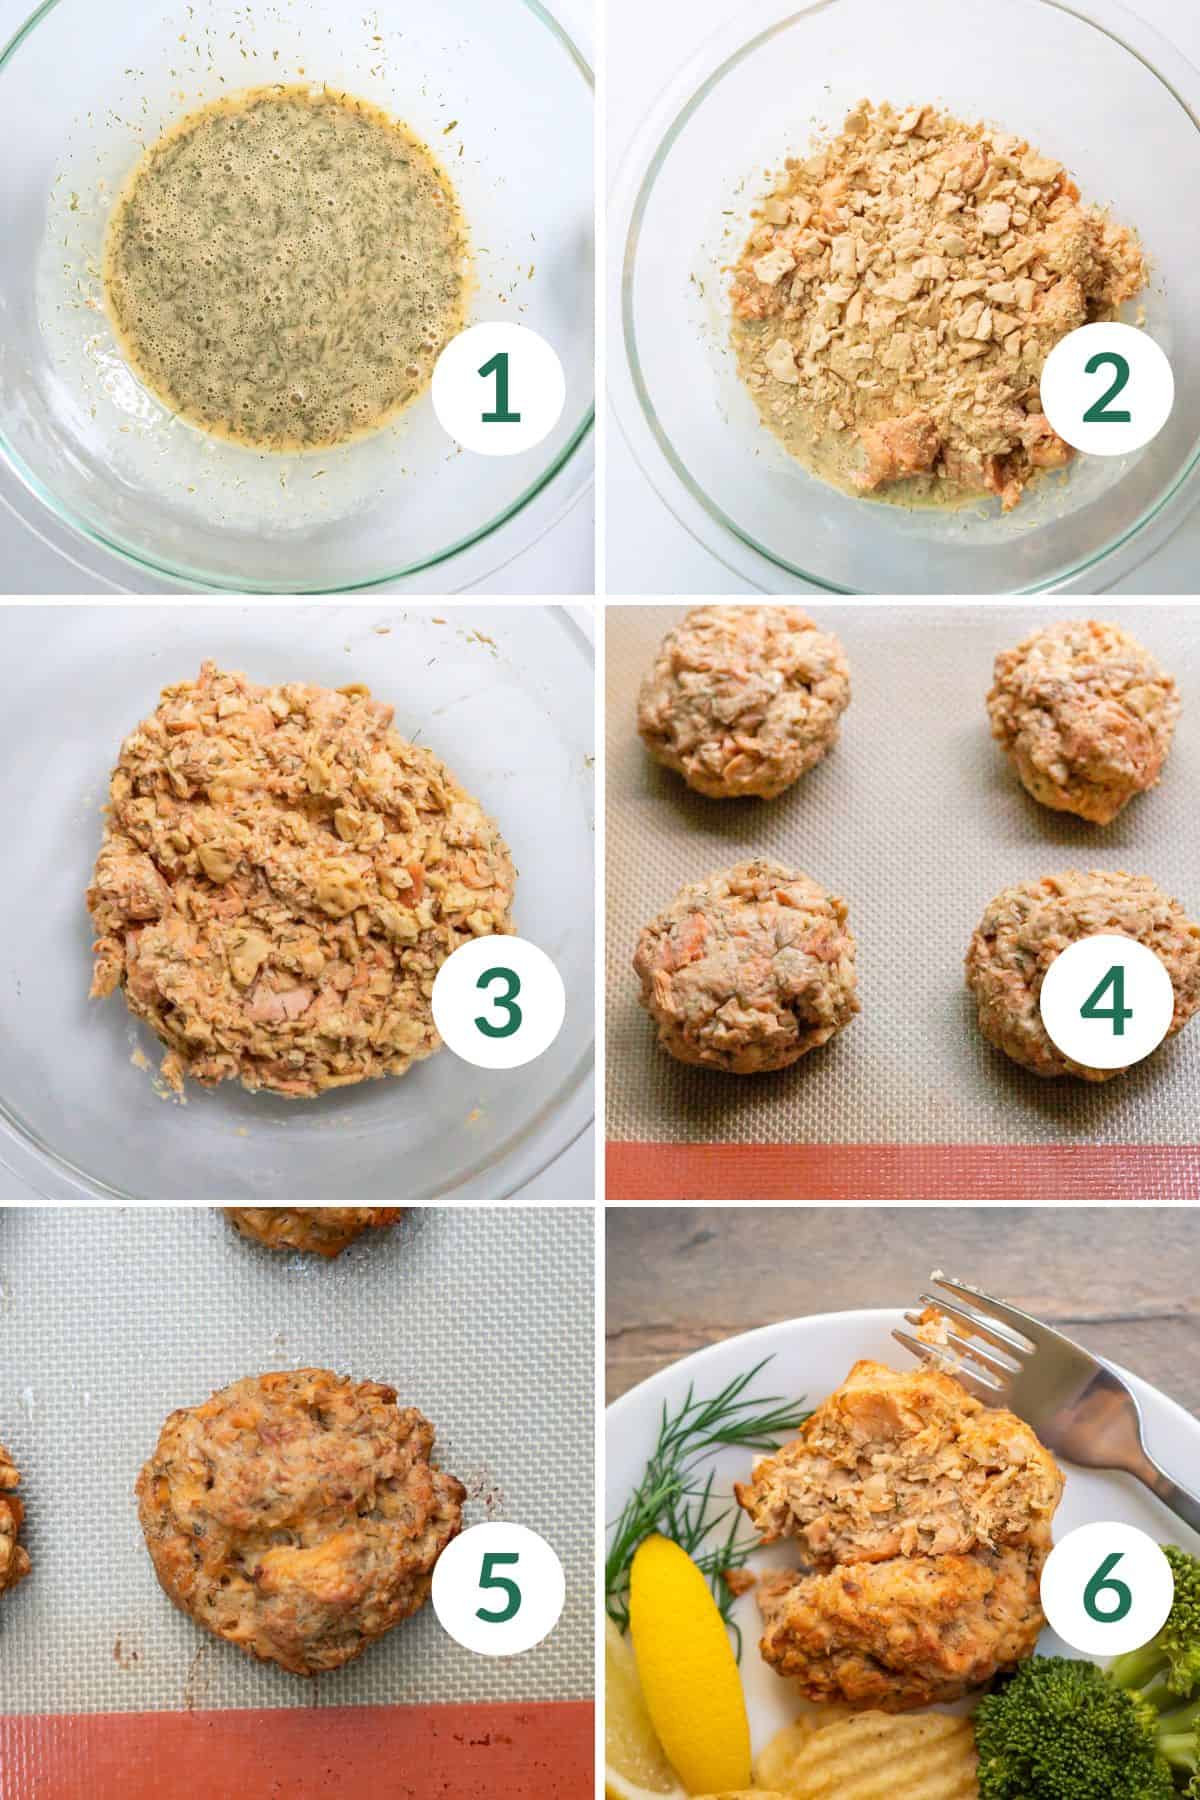 Step-by-step photos of the process of making salmon cakes using canned salmon.